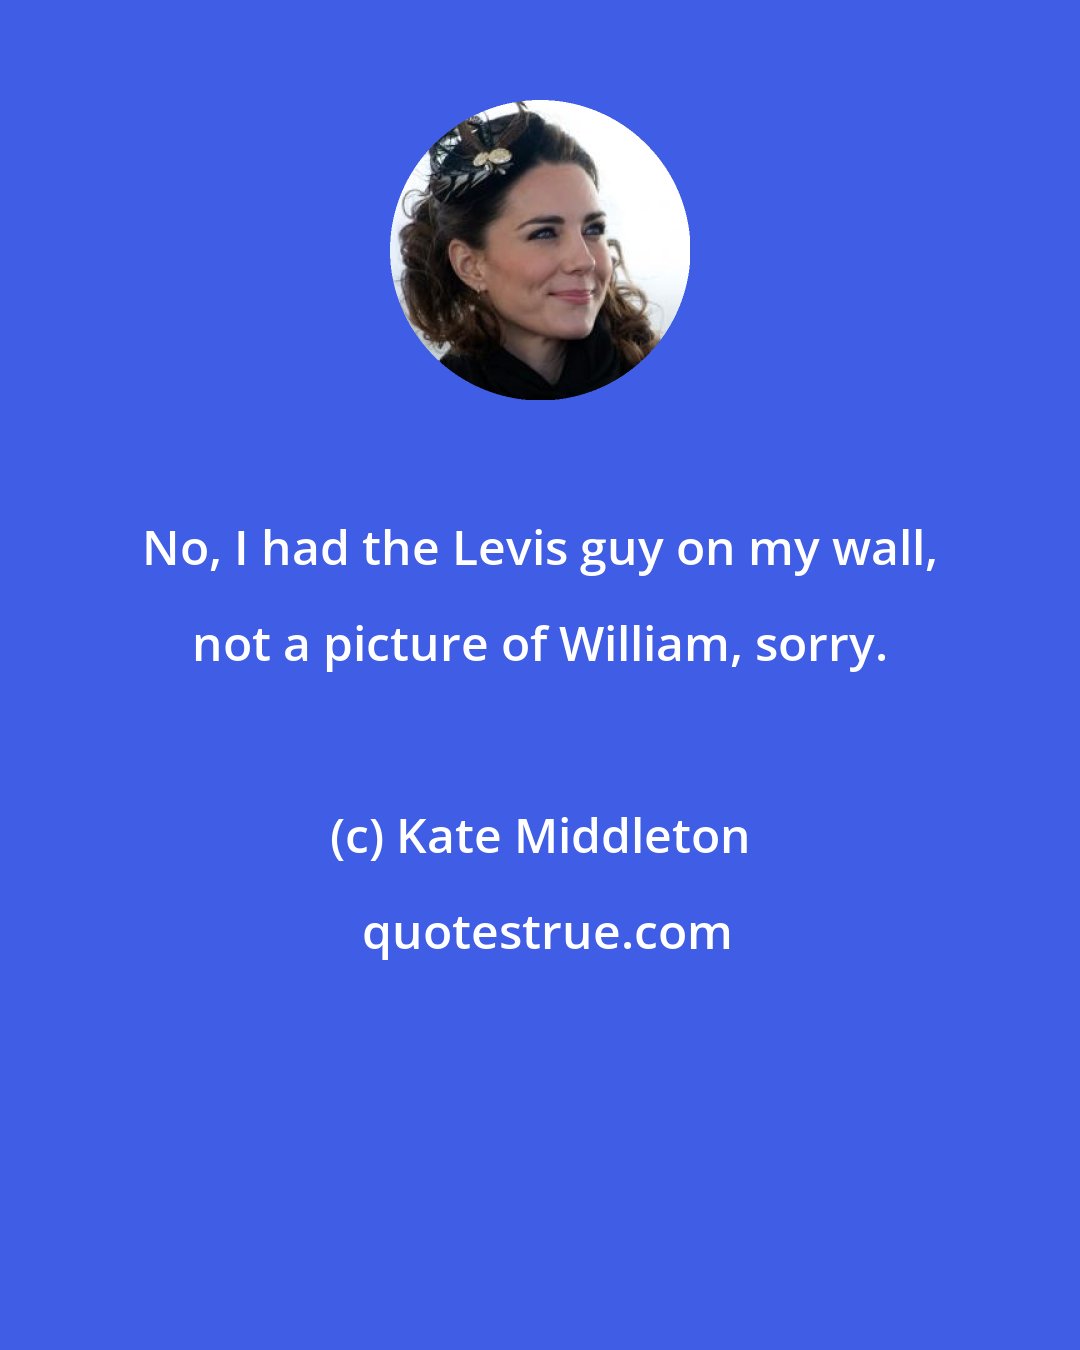 Kate Middleton: No, I had the Levis guy on my wall, not a picture of William, sorry.